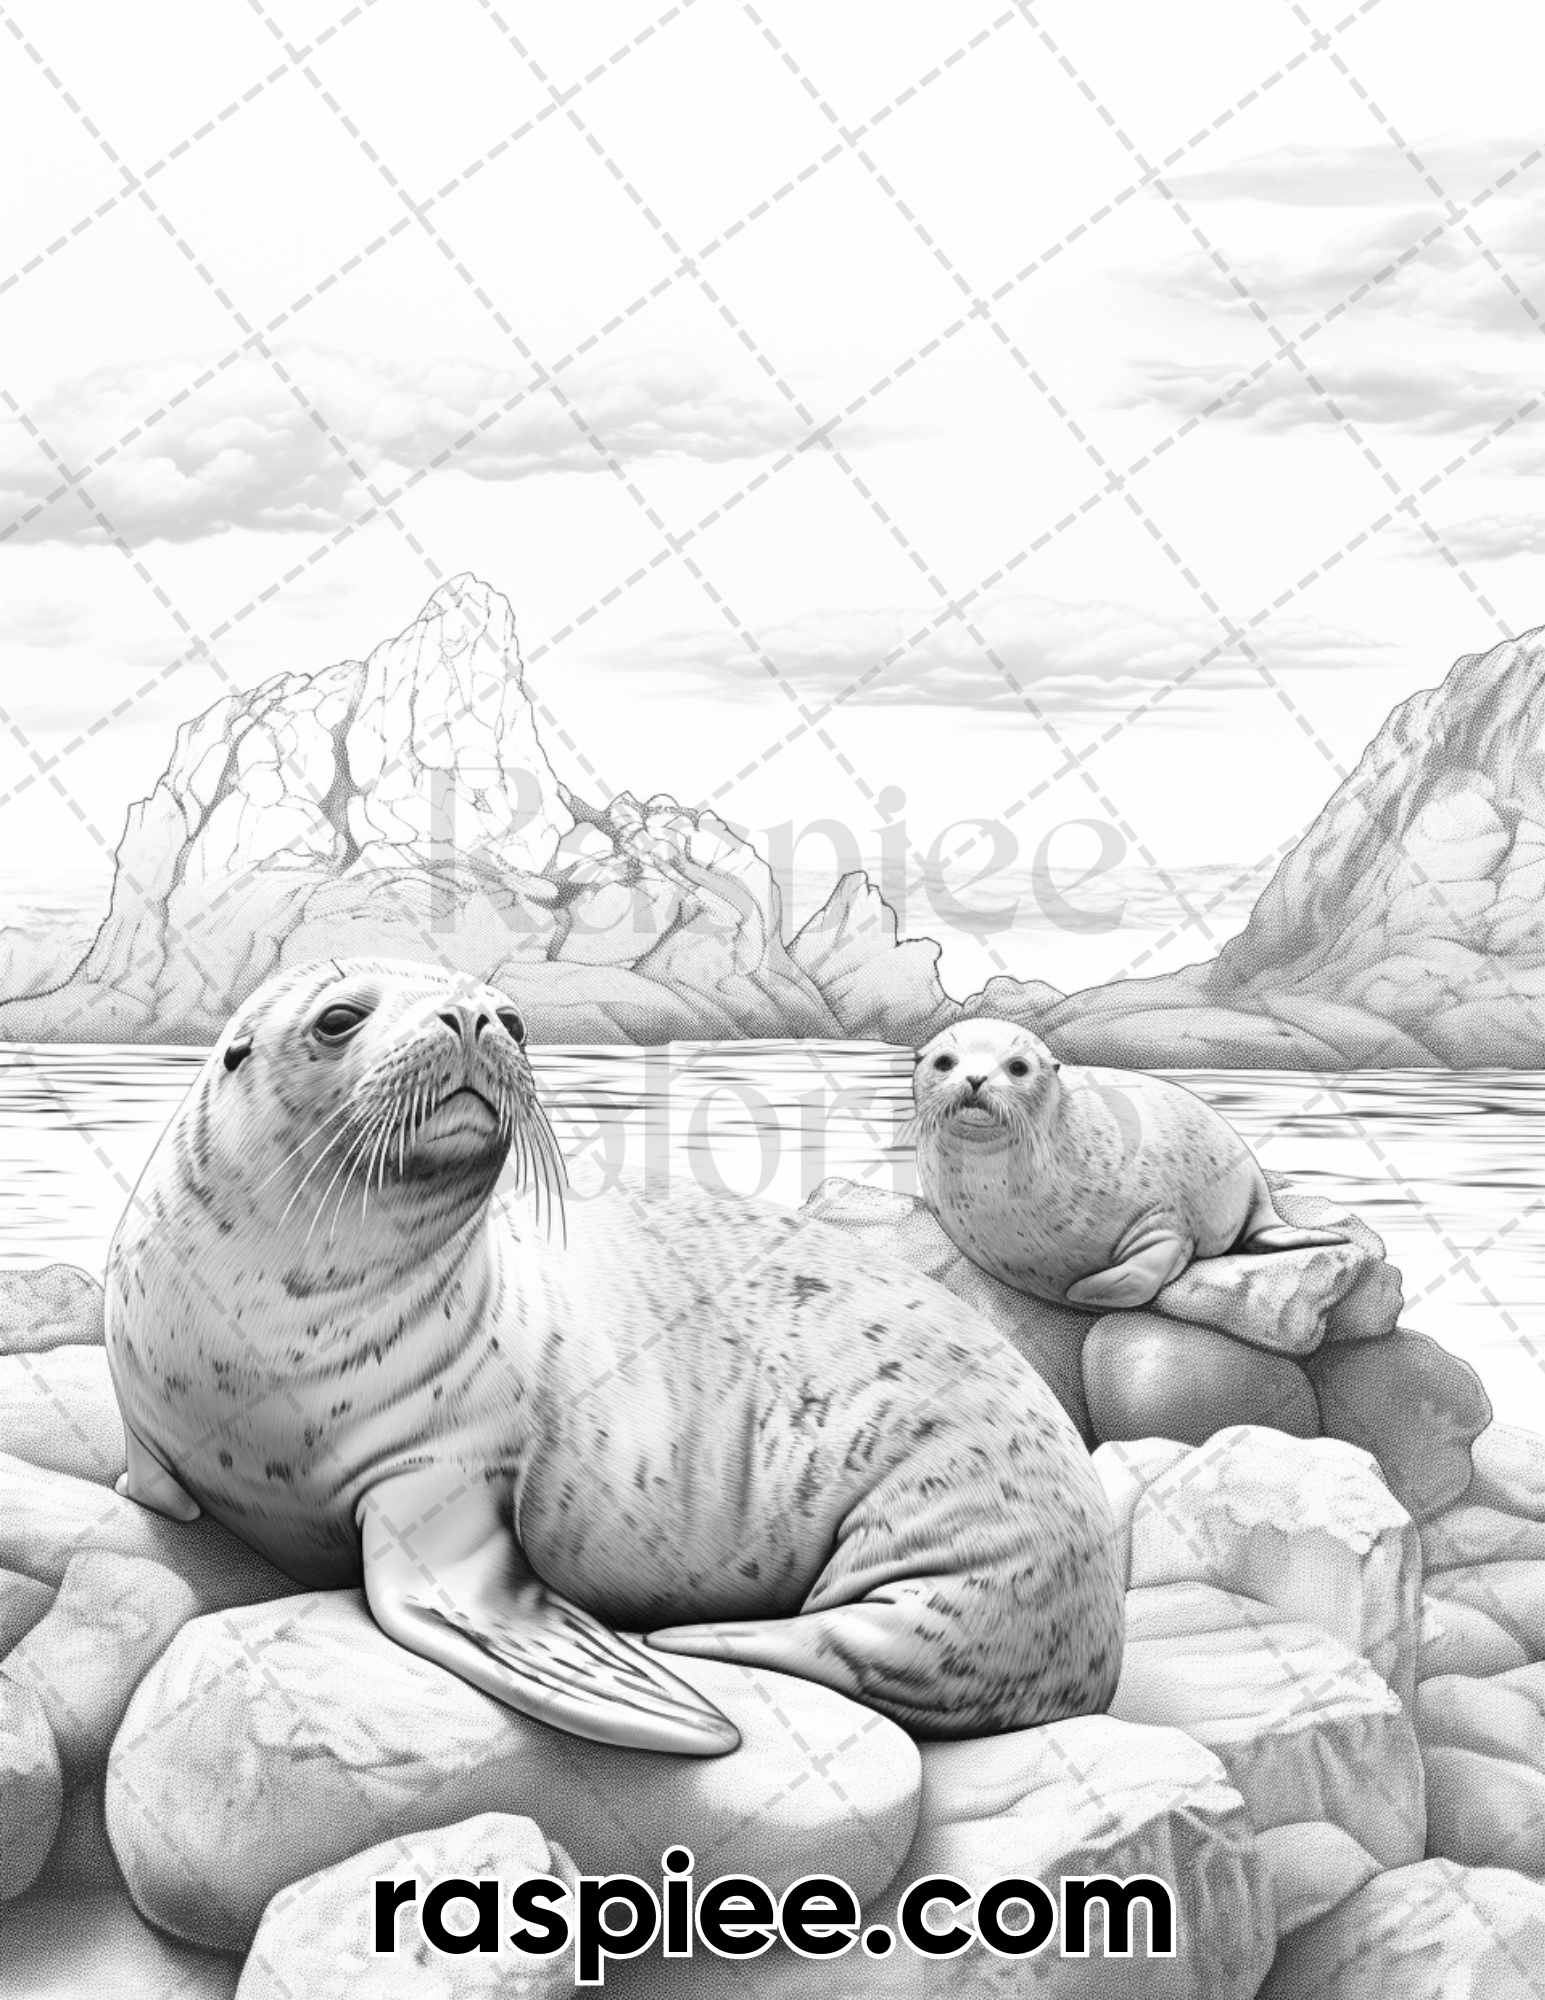 Relaxing Animal Coloring, Snowy Landscape Coloring Pages, Wildlife Coloring Pages, Winter Coloring Pages, Animals Coloring Pages, Animals Coloring Book Printable, Animal Coloring Sheets